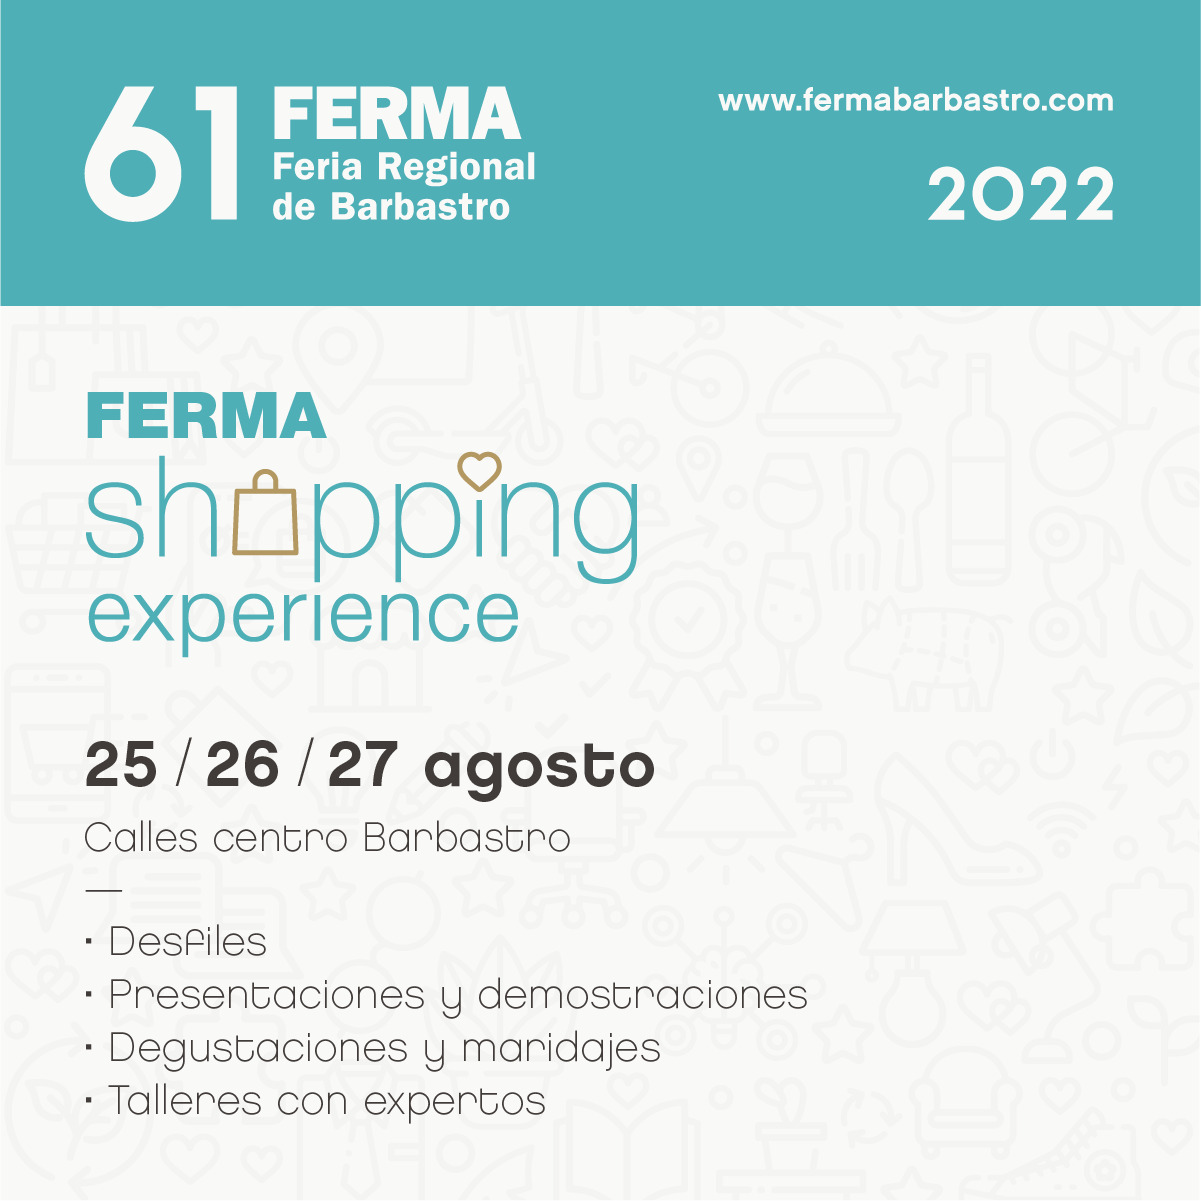 FERMA SHOPPING EXPERIENCE